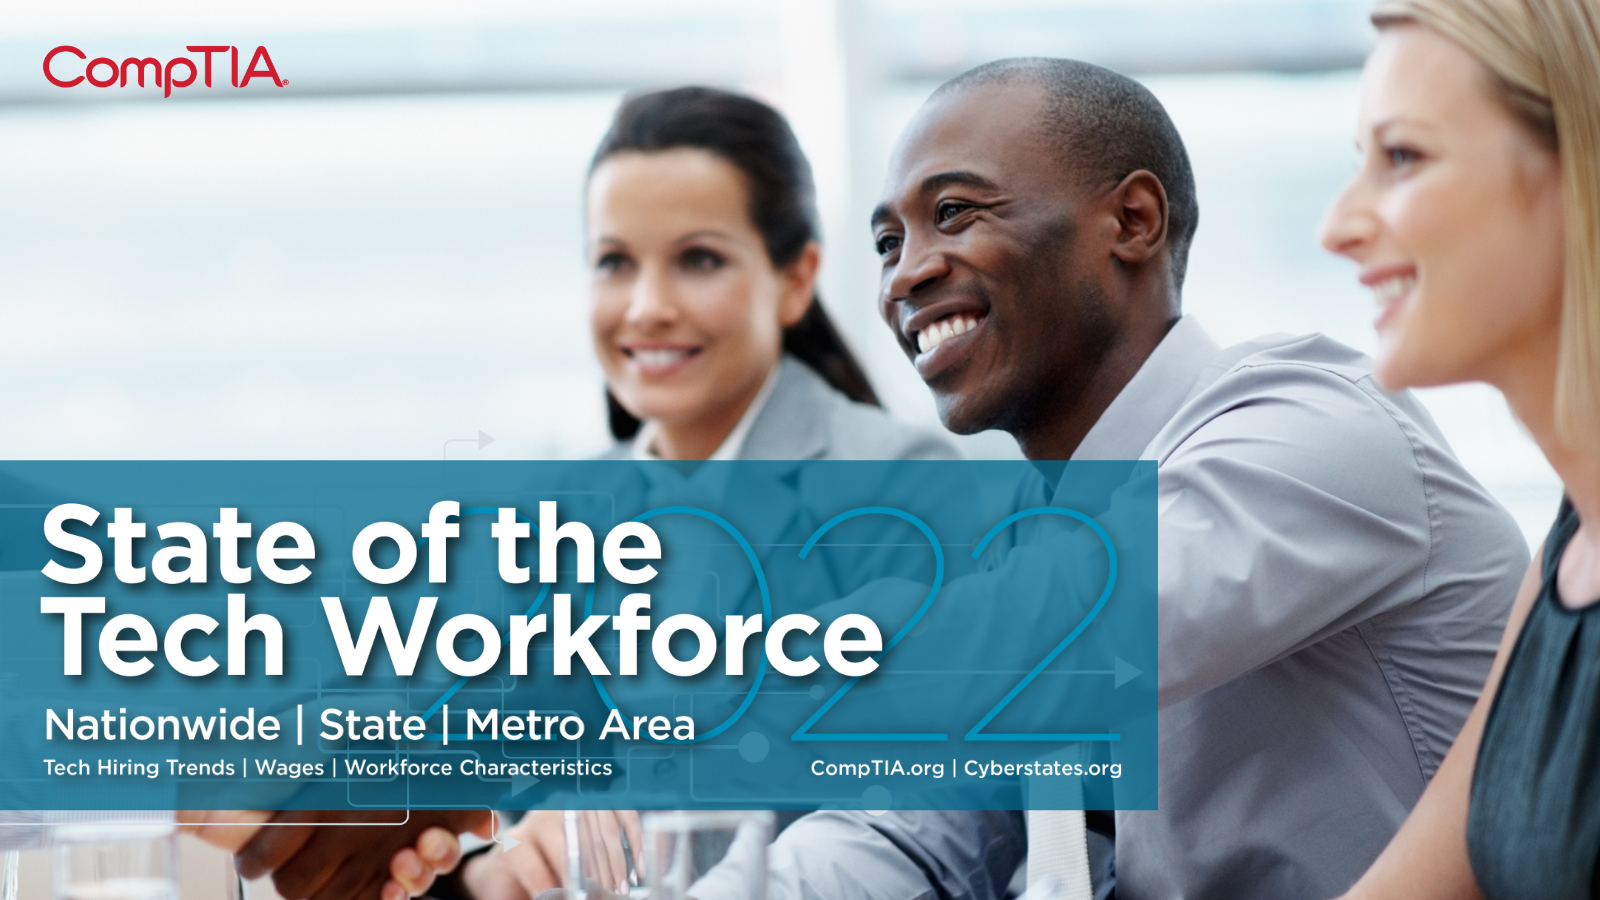 CompTIA_State of the Tech Workforce 2022_TwitterSizing